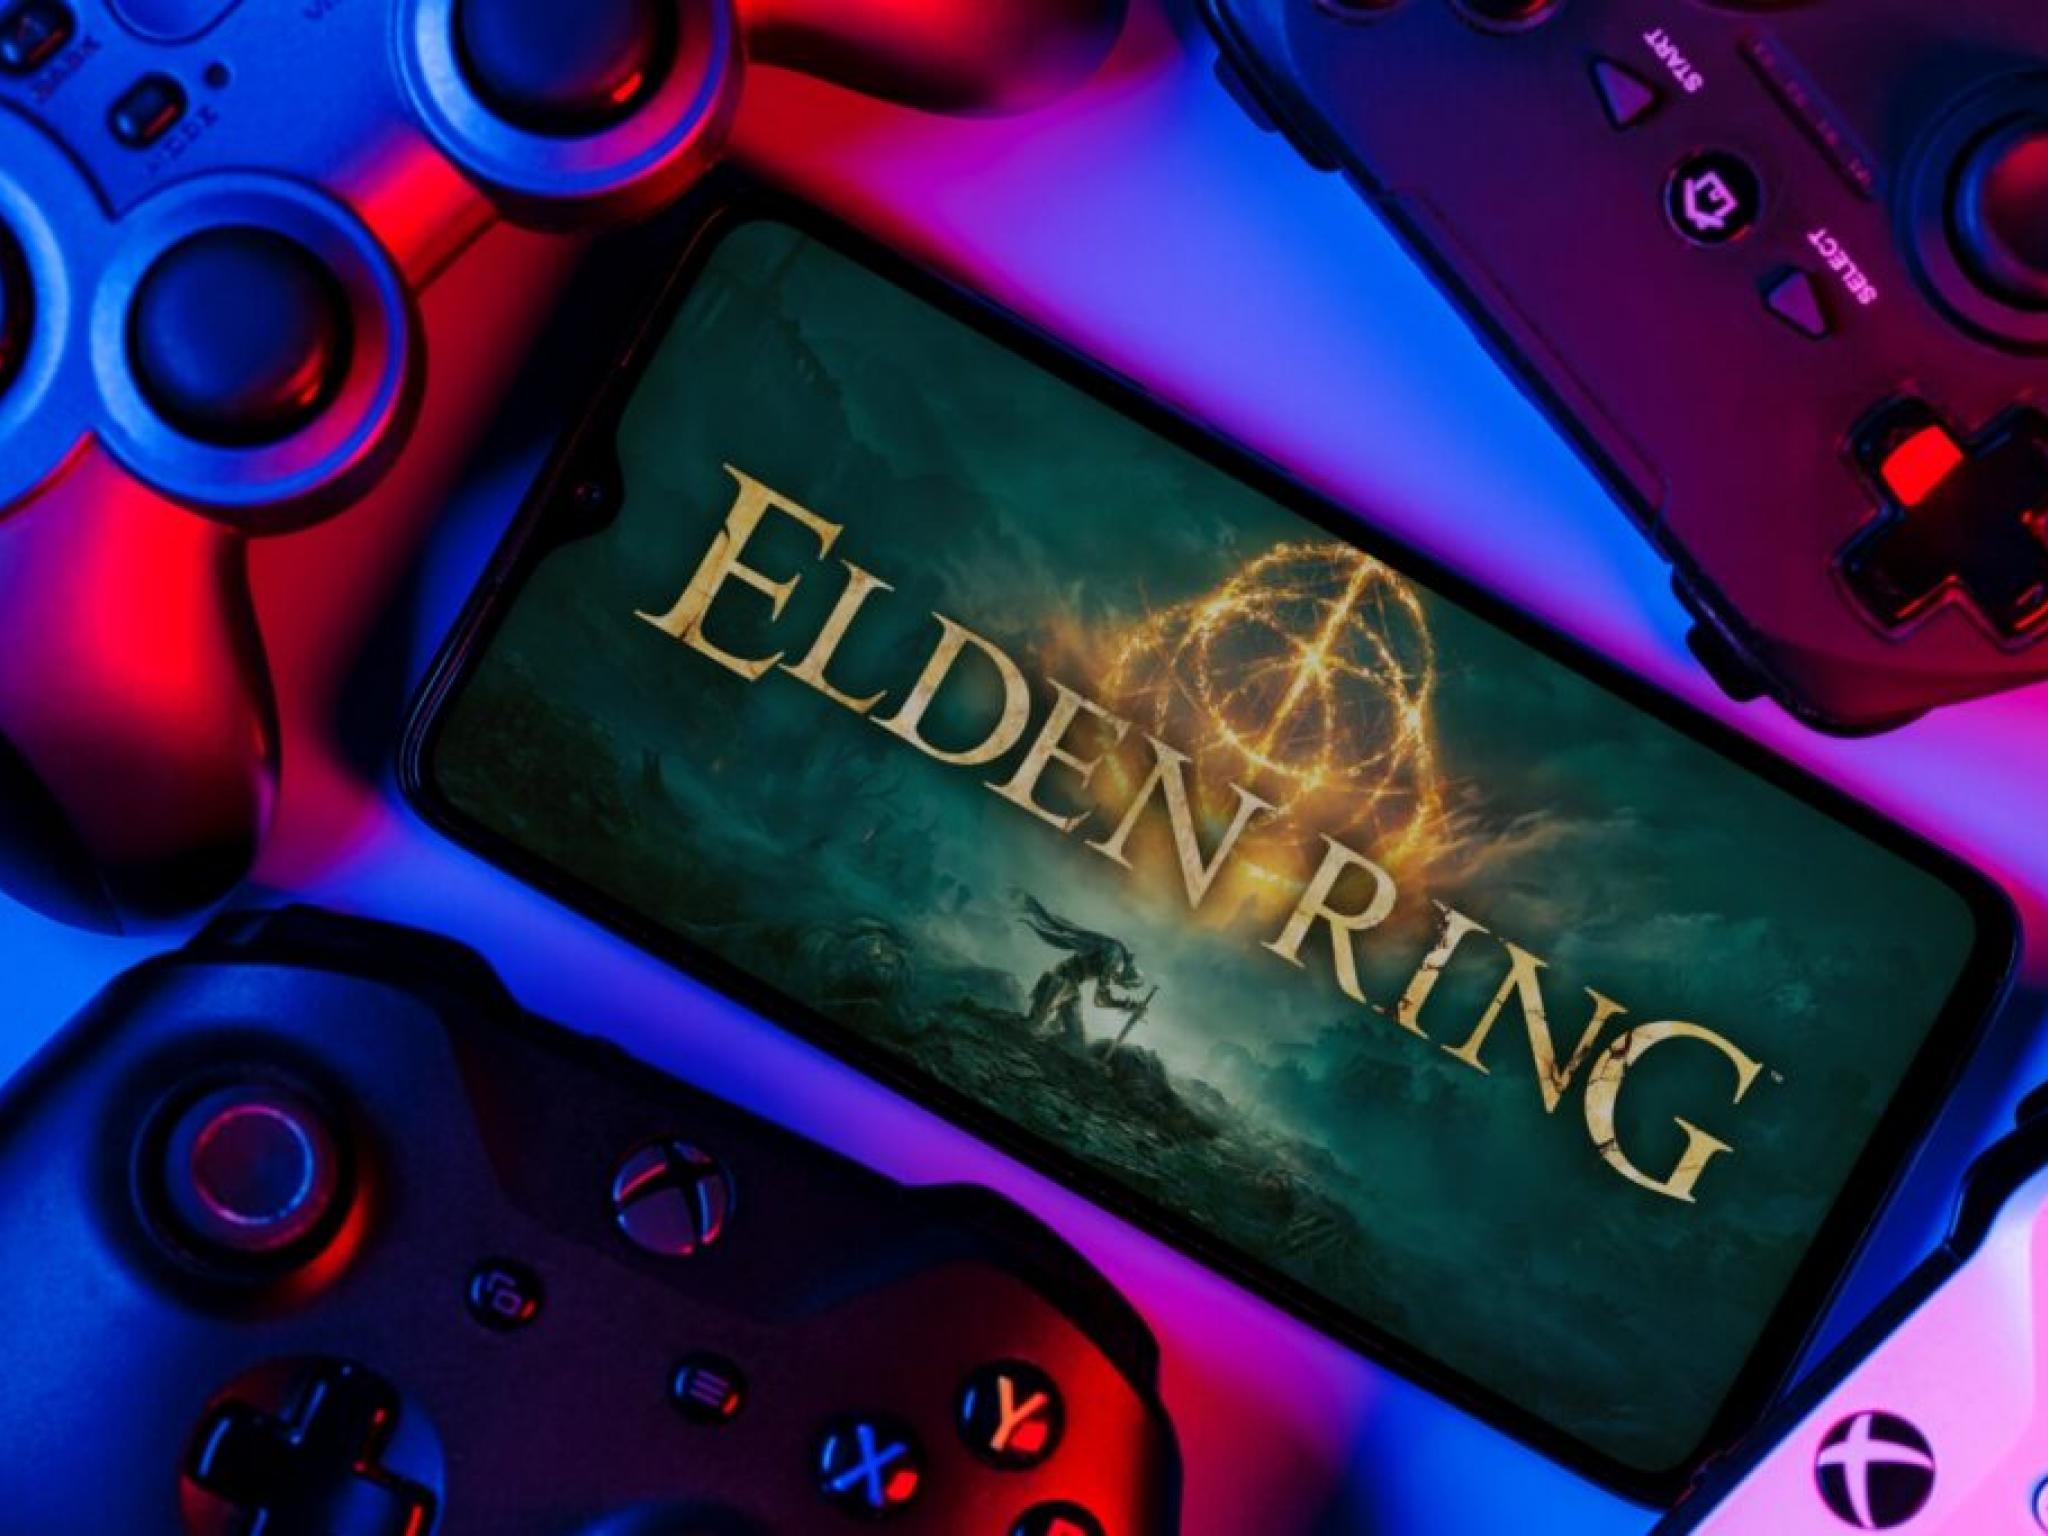  elden-ring-director-vows-to-shield-fromsoftware-from-gaming-industry-layoffs-i-would-not-let-that-happen 